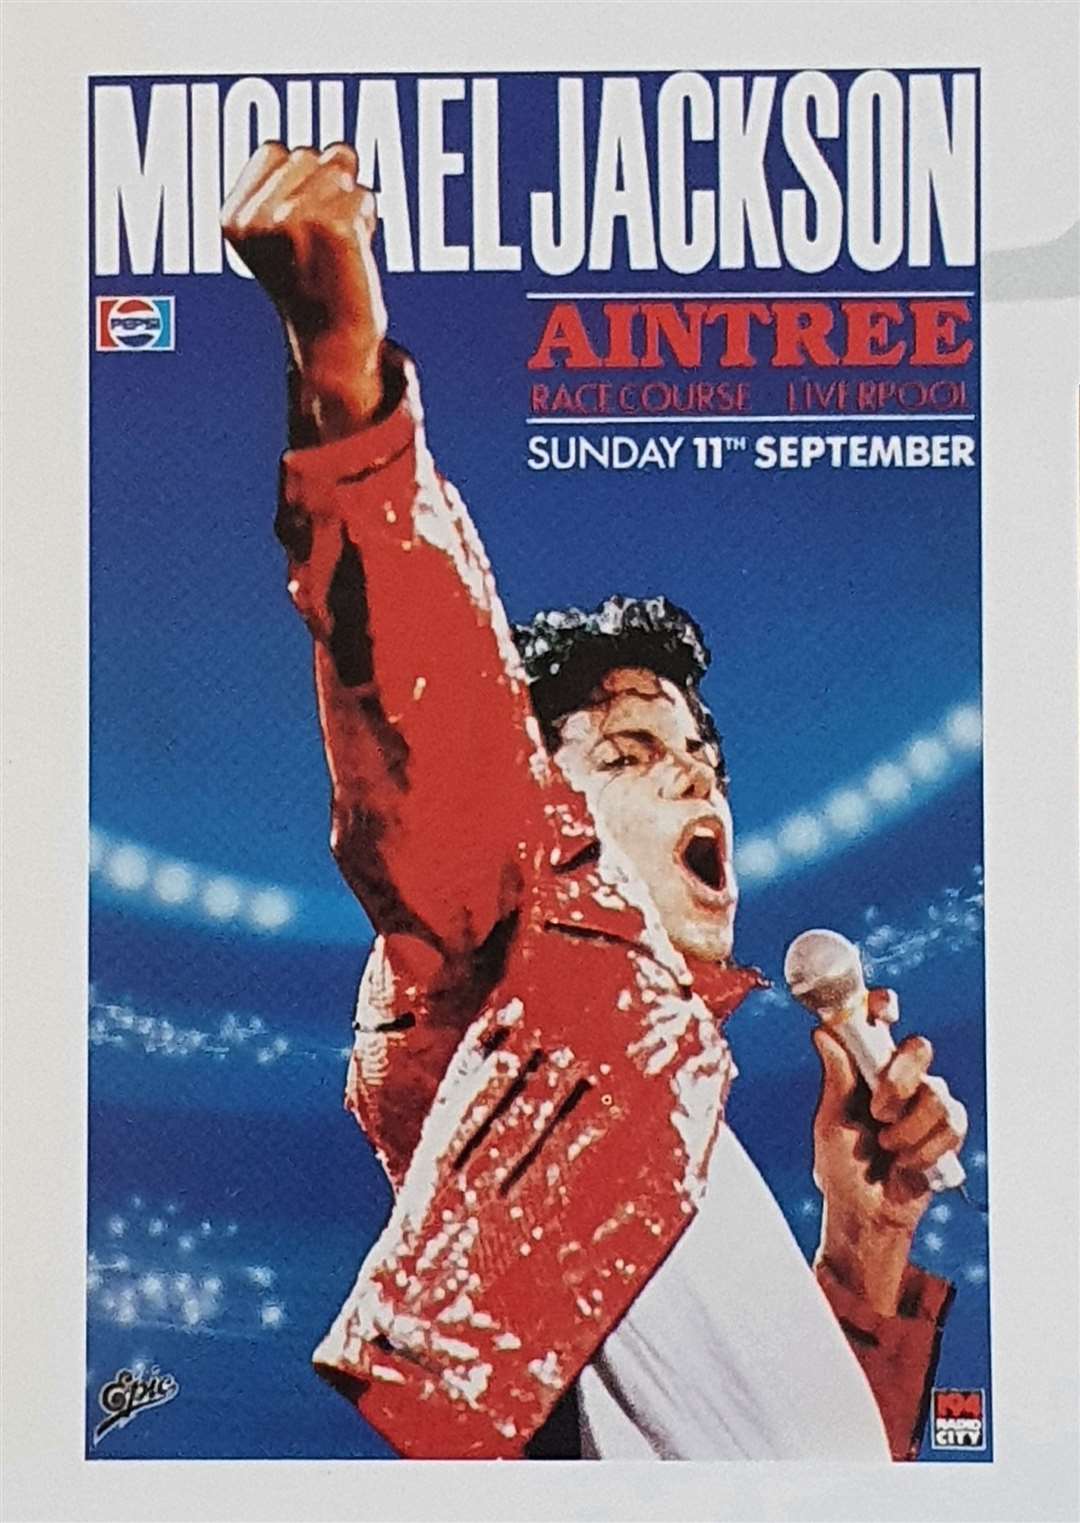 He created this poster for one of Michael Jackson's shows